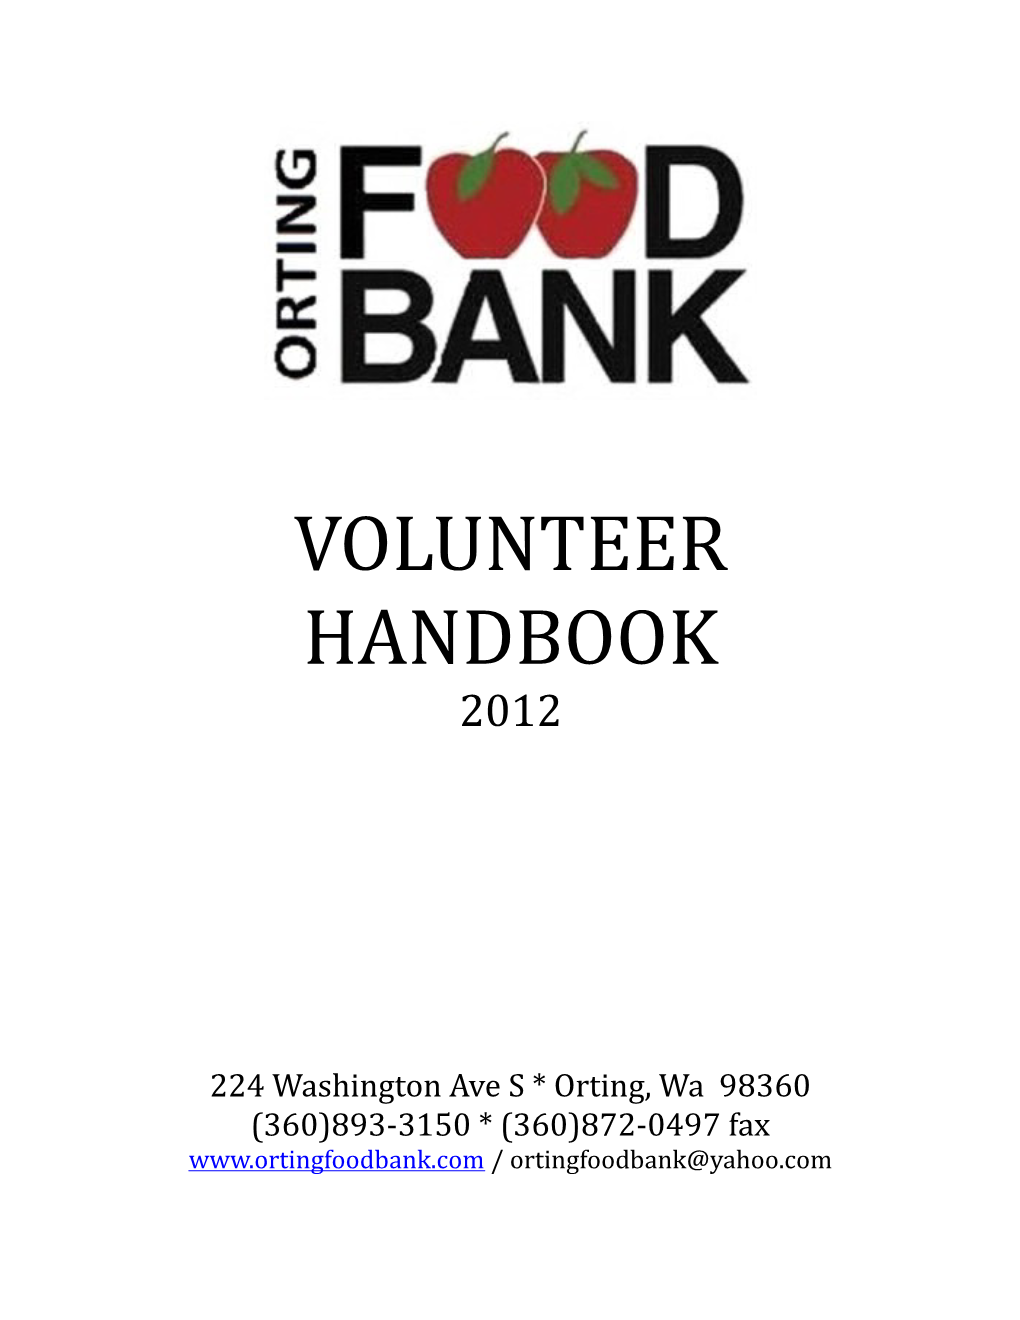 Welcome to the Orting Food Bank!